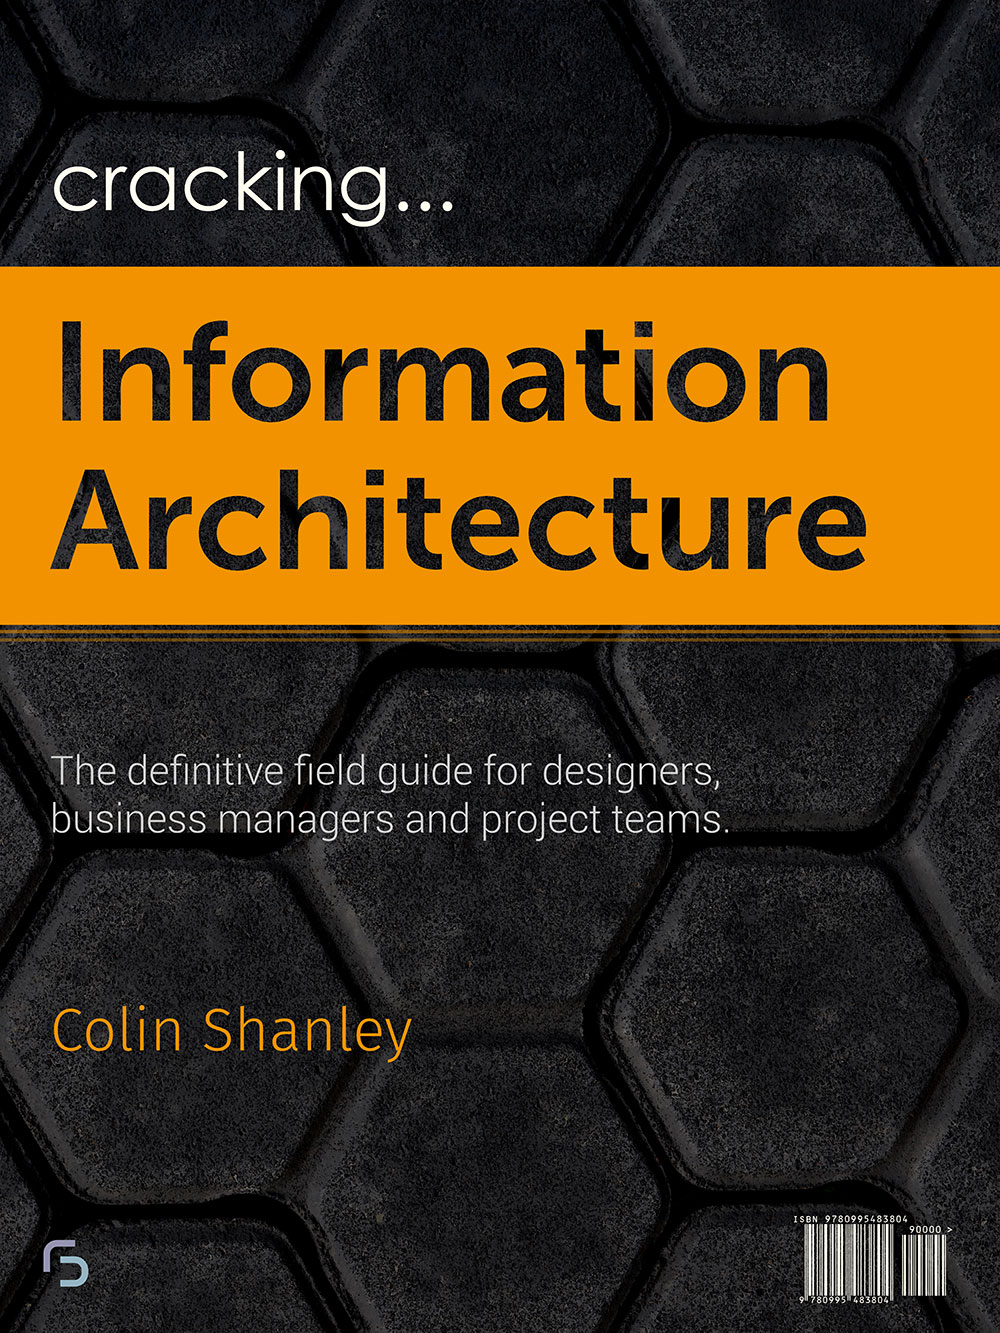 Book cover - Cracking Information Architecture